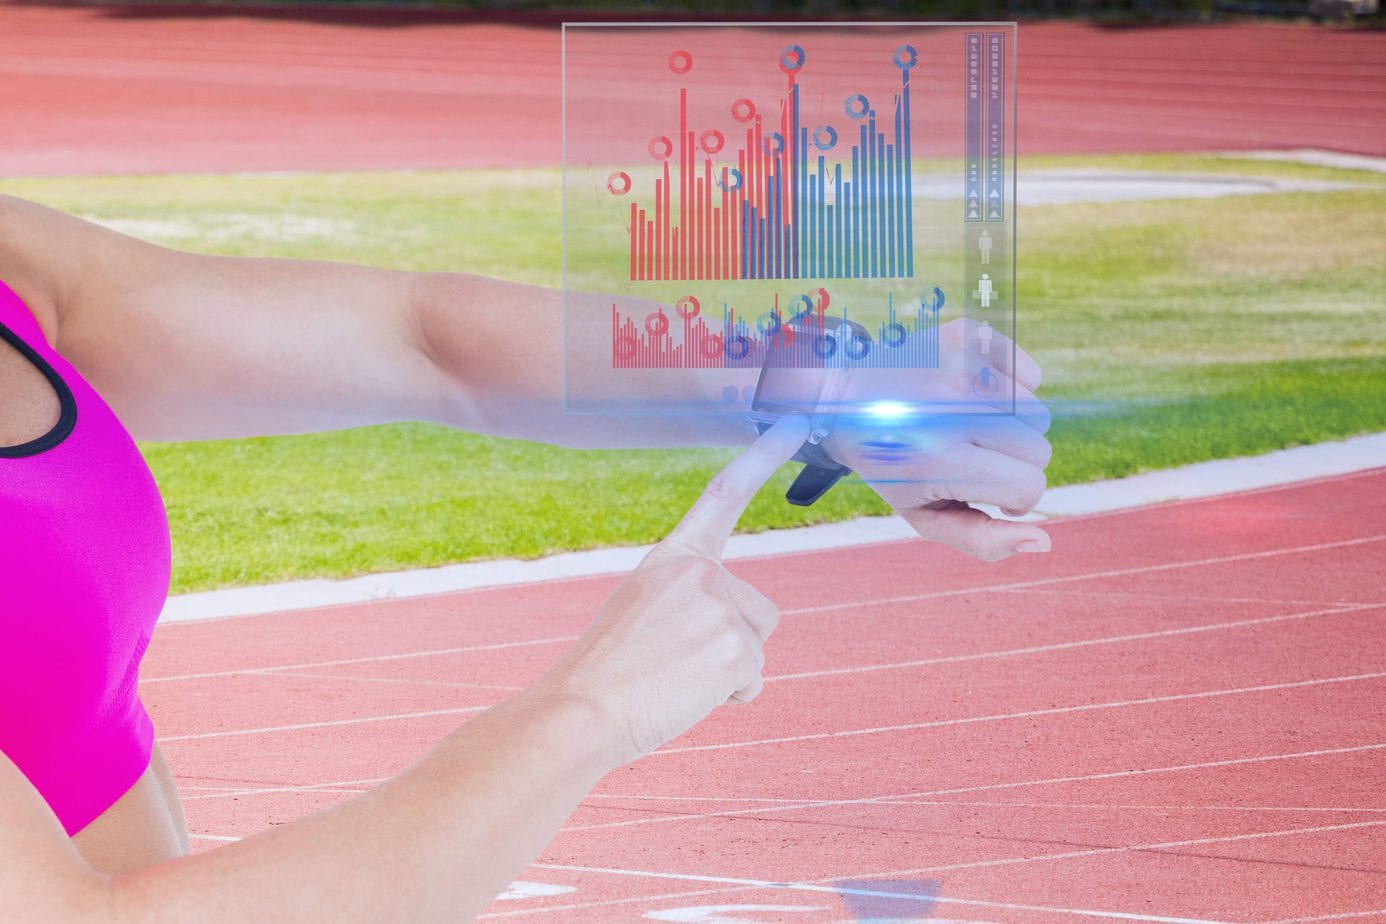 Running with a virtual partner, or how to use technology to improve performance